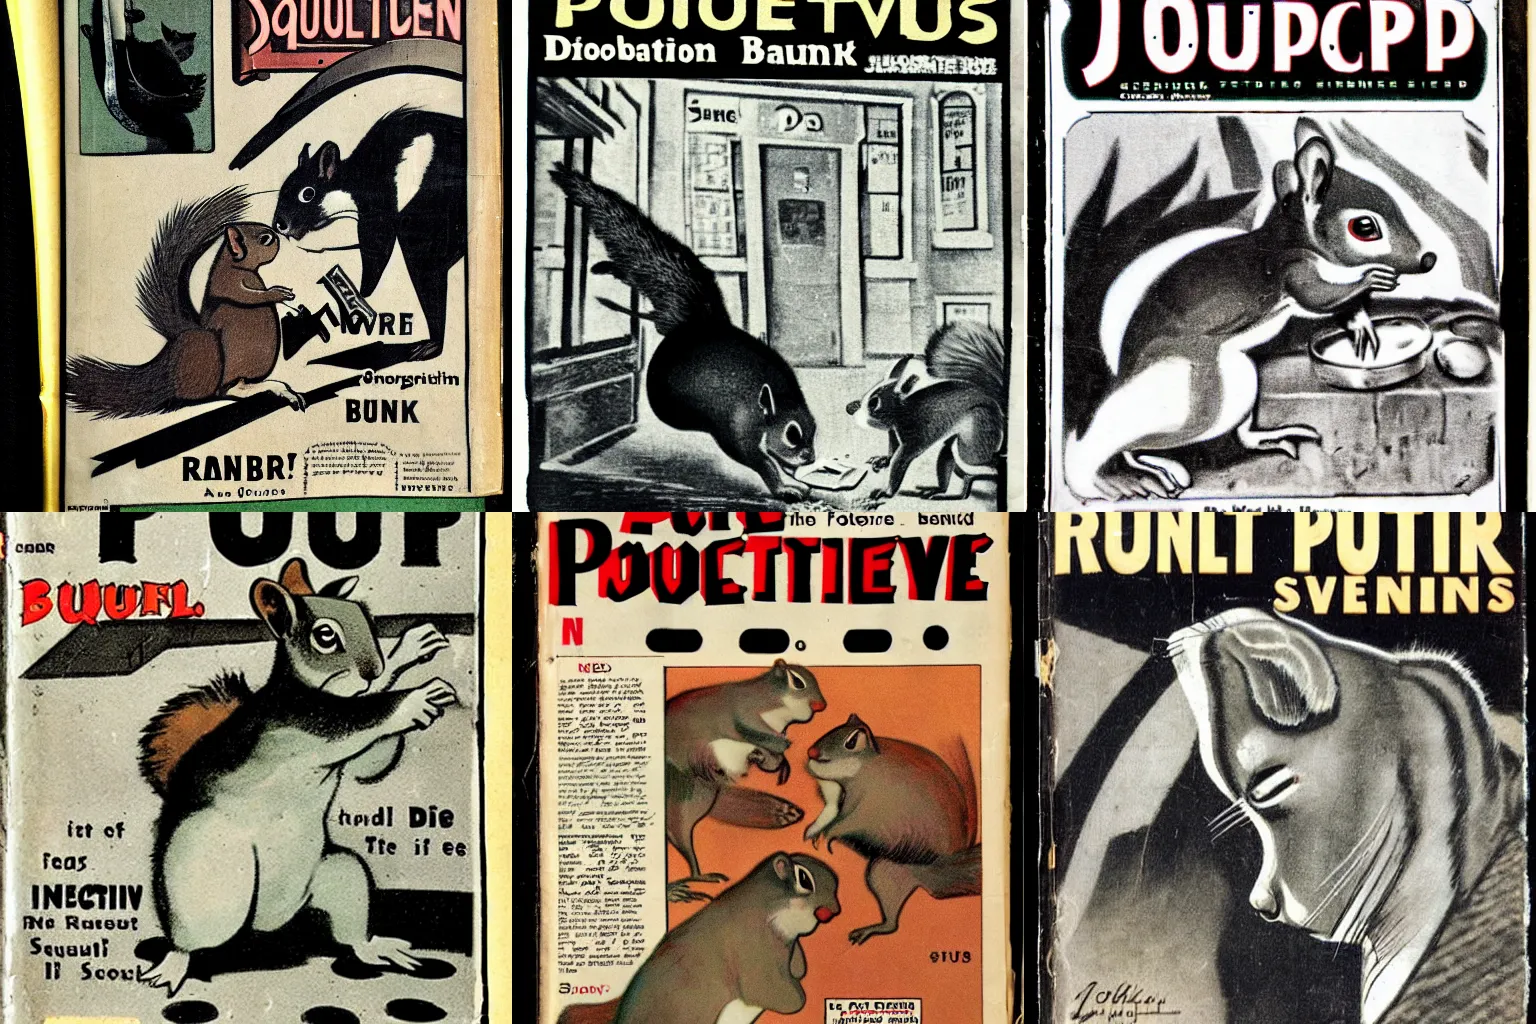 Prompt: 1 9 3 0 s pulp detective magazine about squirrel bank robberies